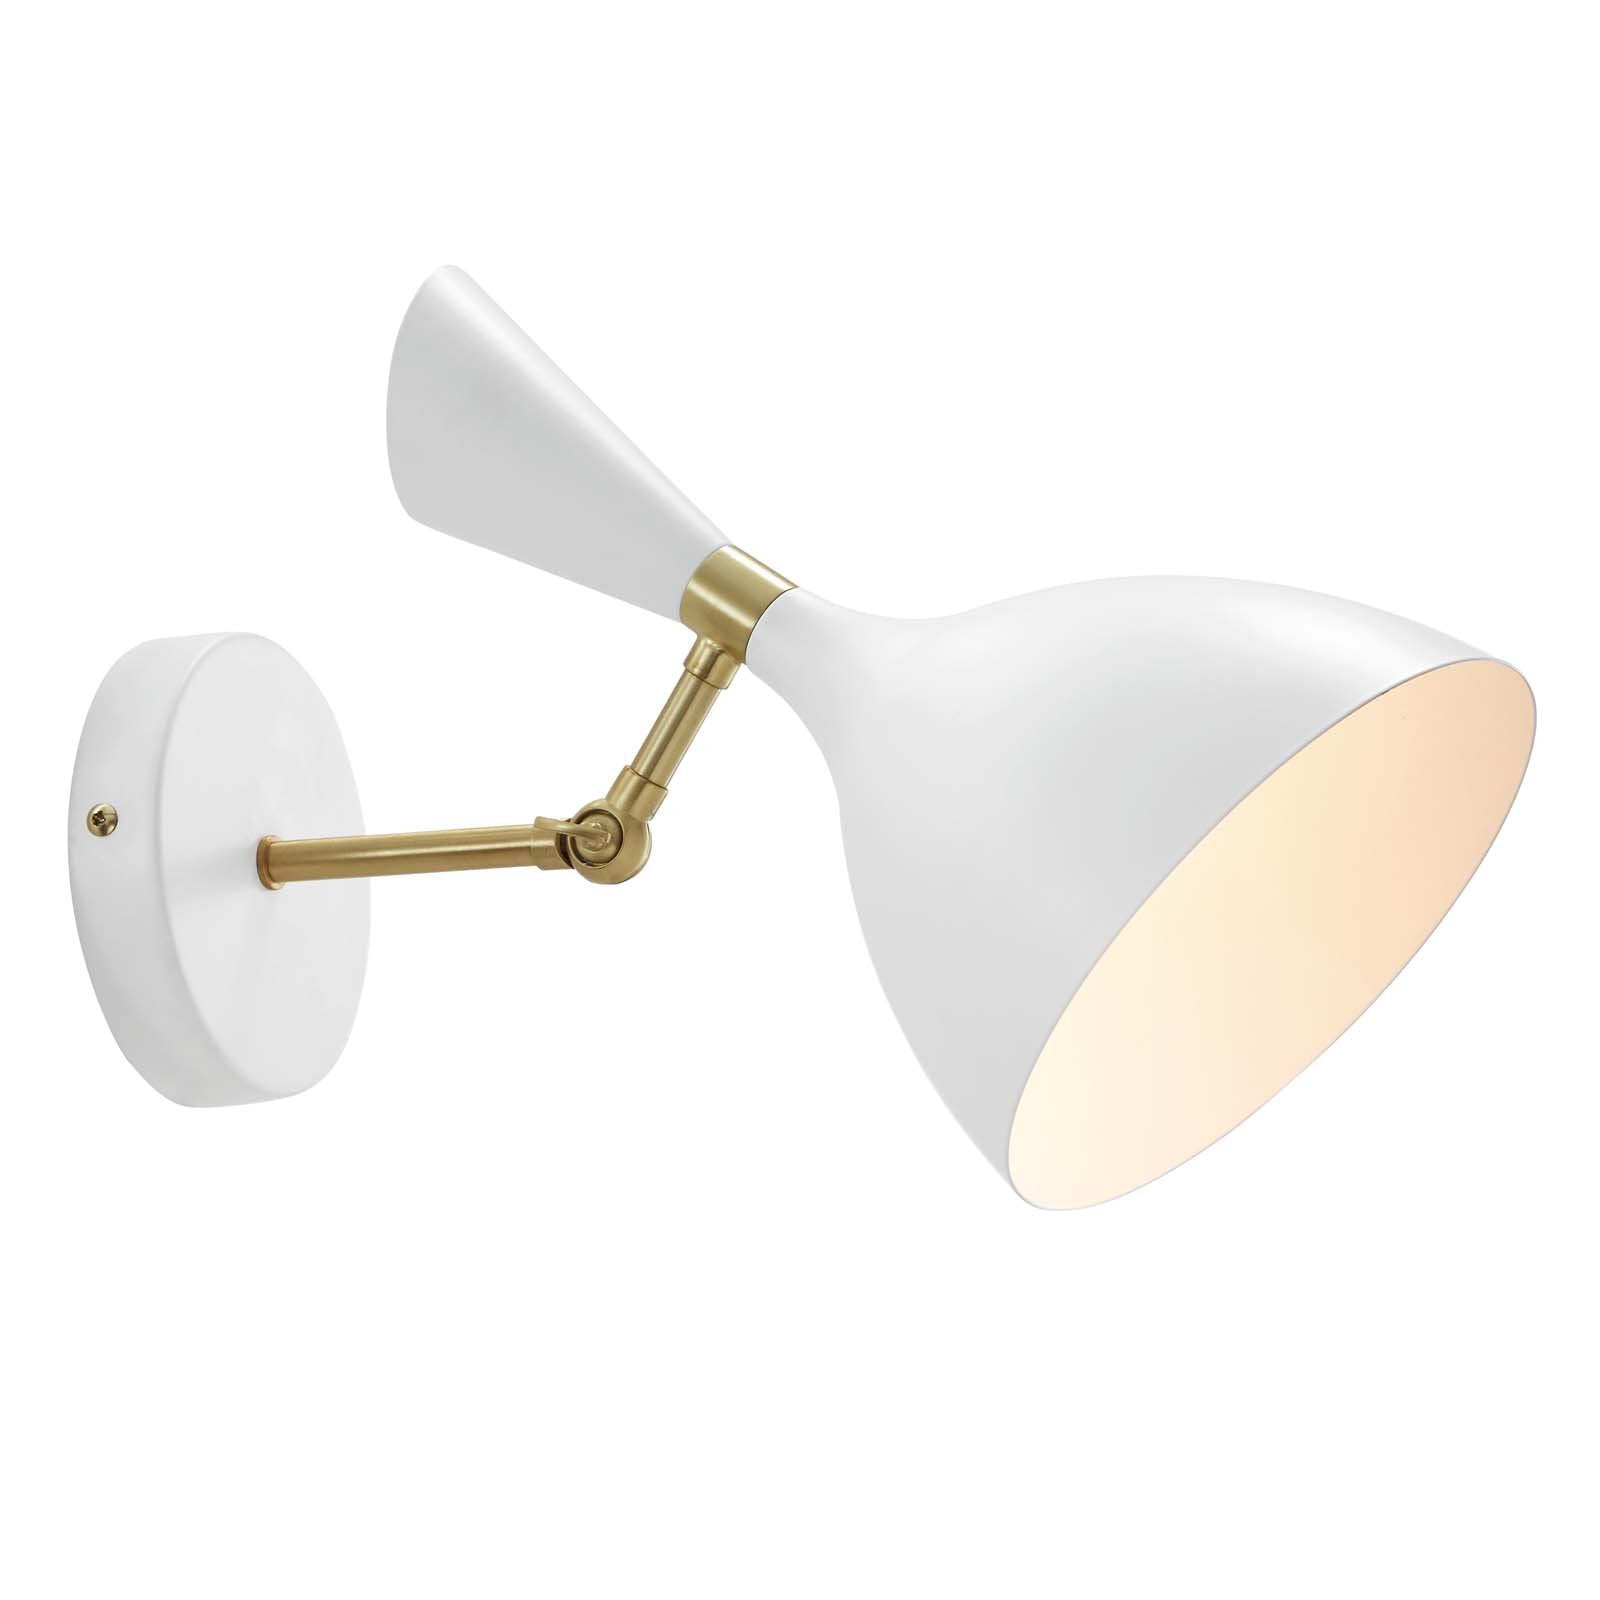 Declare Adjustable Wall Sconce - East Shore Modern Home Furnishings